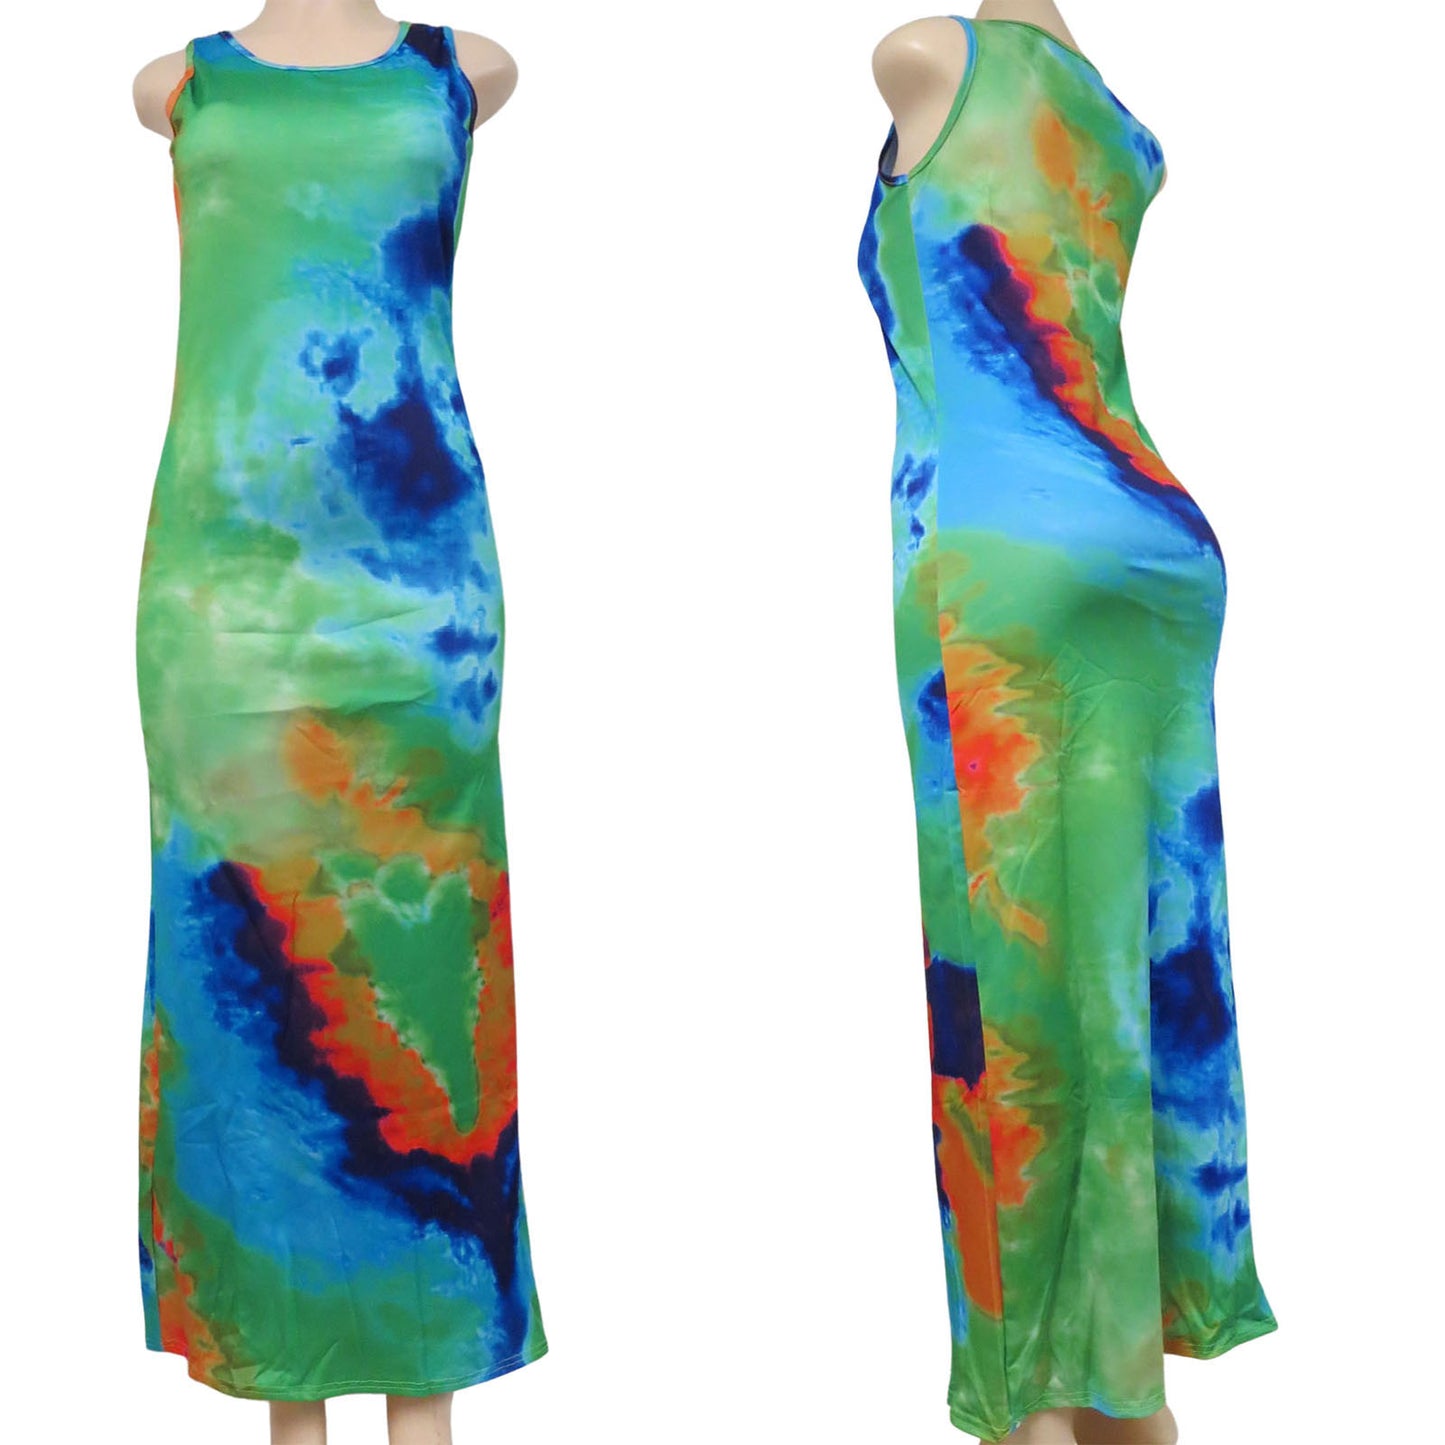 wholesale tie dye long sleeveless dress for women in multicolor green with blue and orange